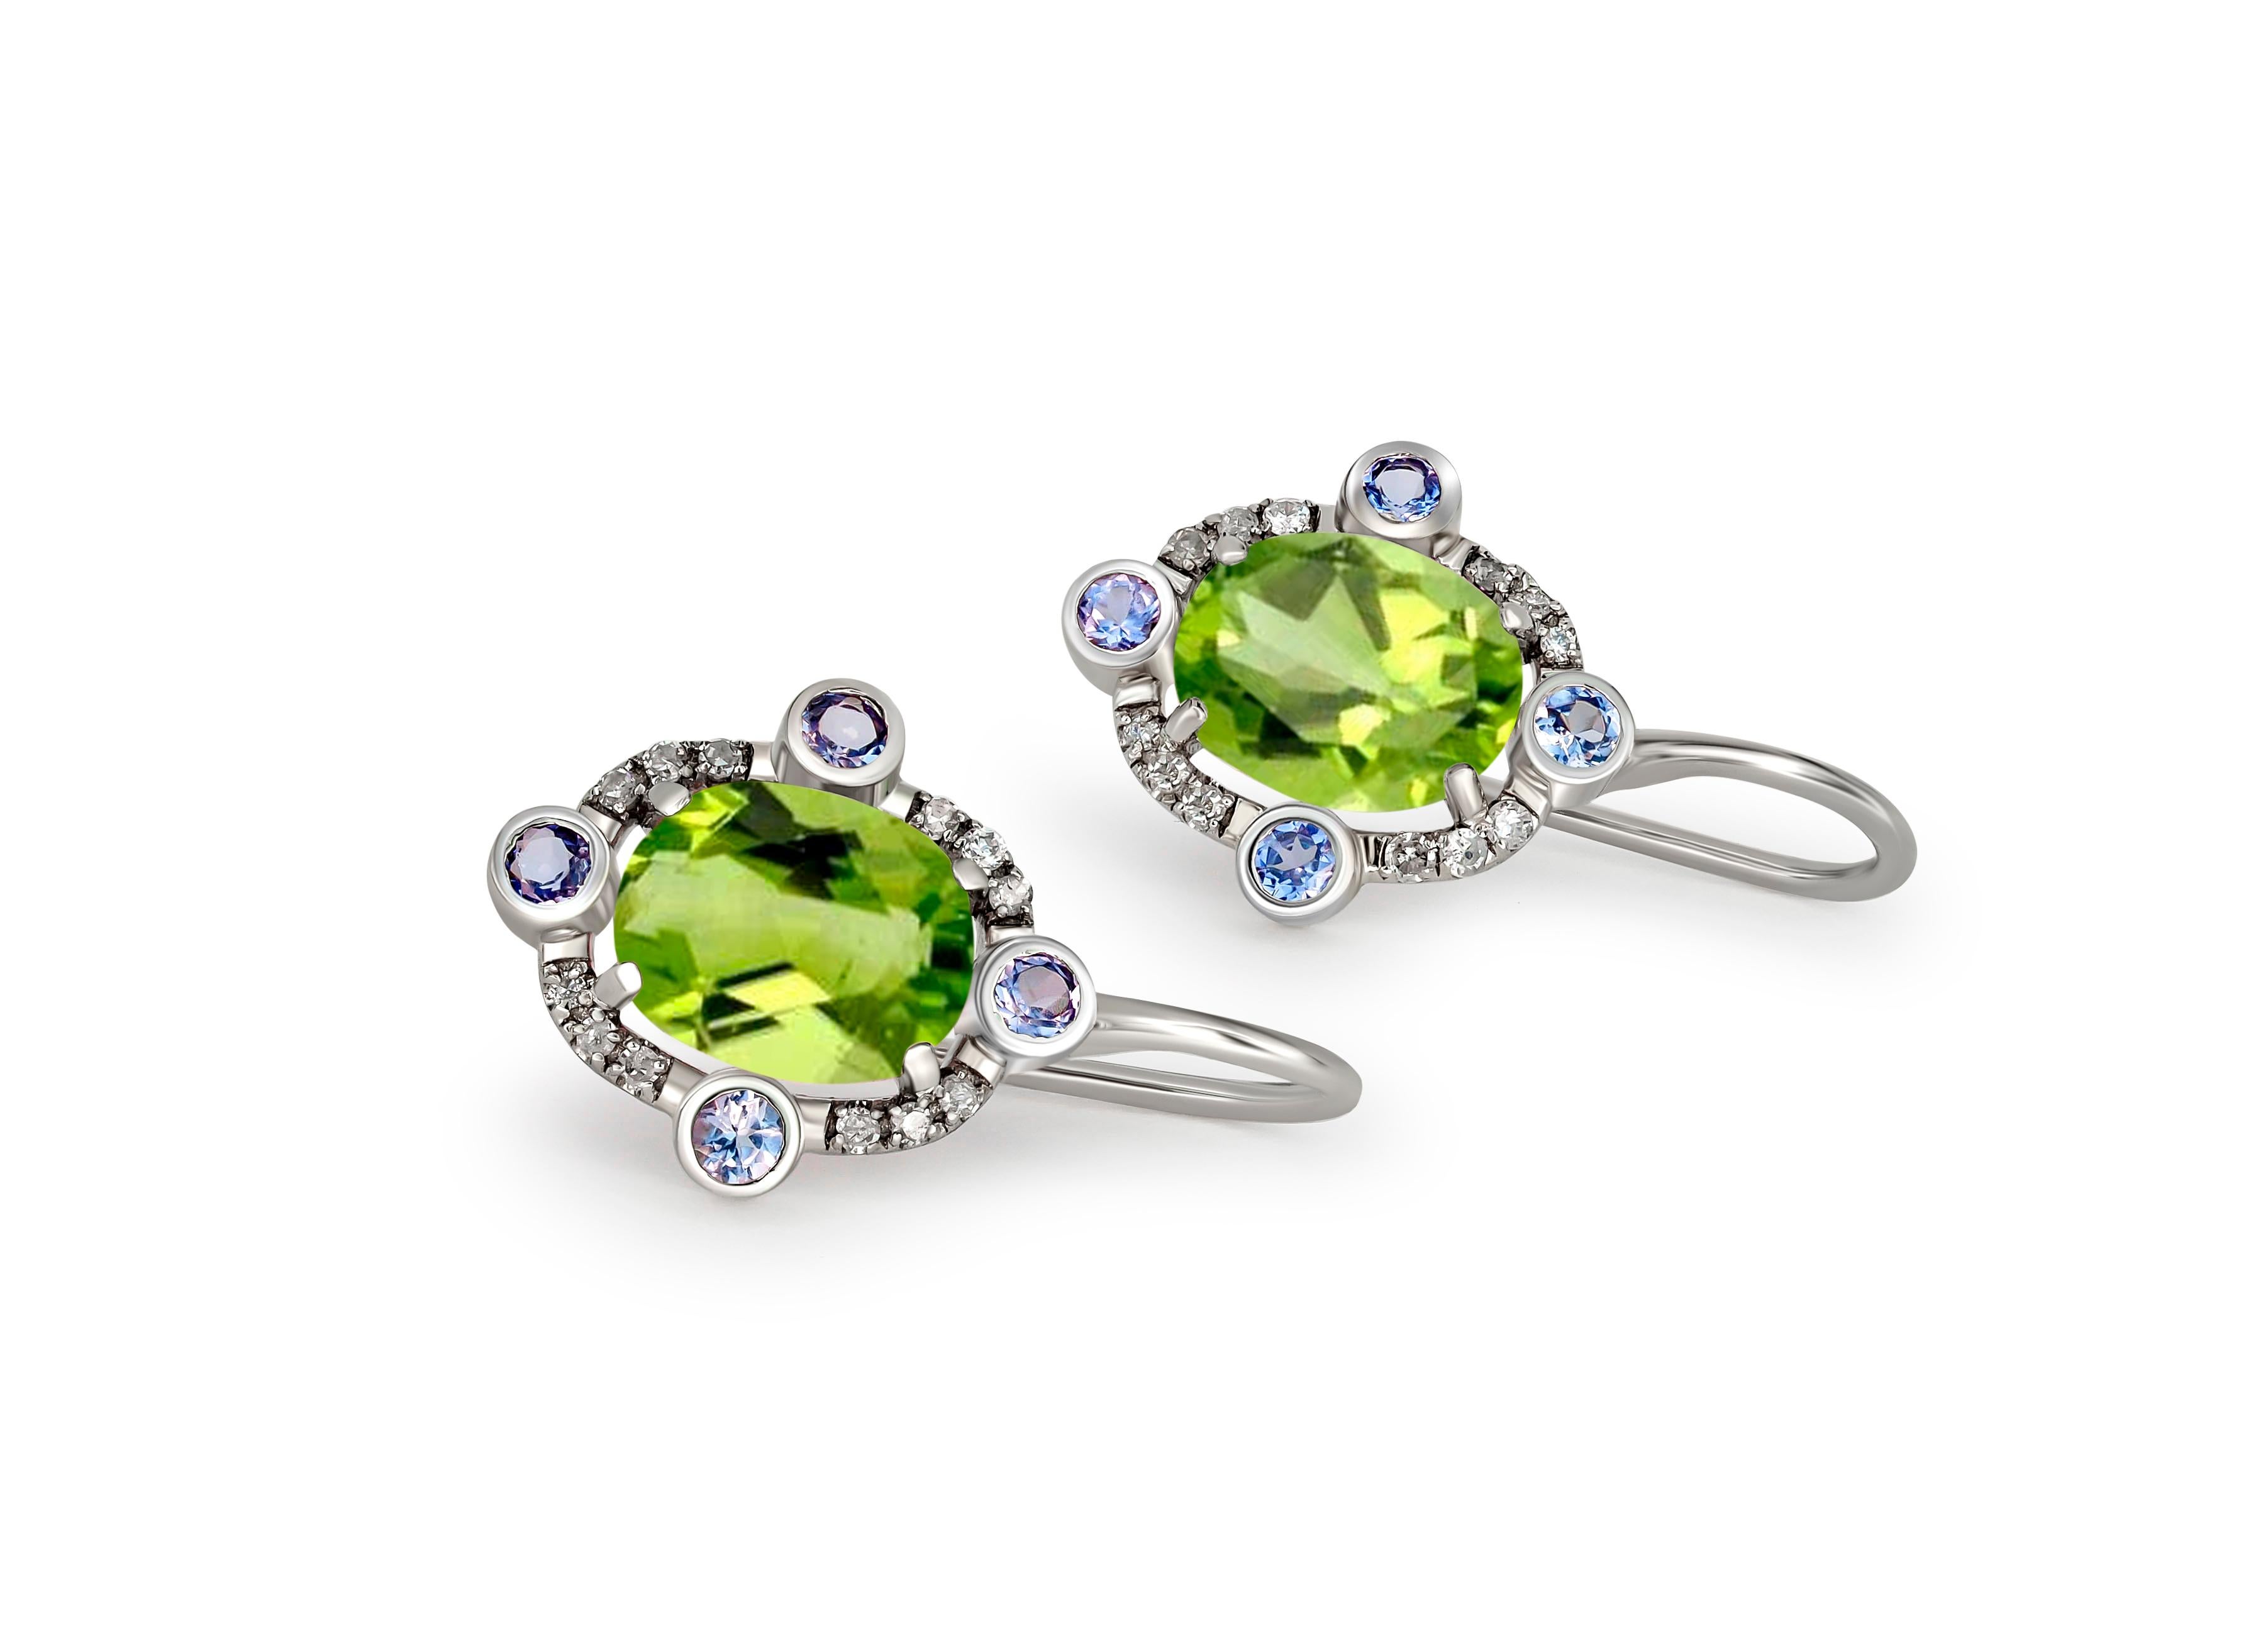 Peridot 14k gold drop earrings.
Oval Peridot 14k gold earrings. 14 kt gold earrings with Peridot, sapphires and diamonds. August birthstone earrings. 

Gold - 14 kt gold 
Size: 20x12 mm 
Weight: 2.50 gr

Central stones: 
Peridots, 2 pieces, oval